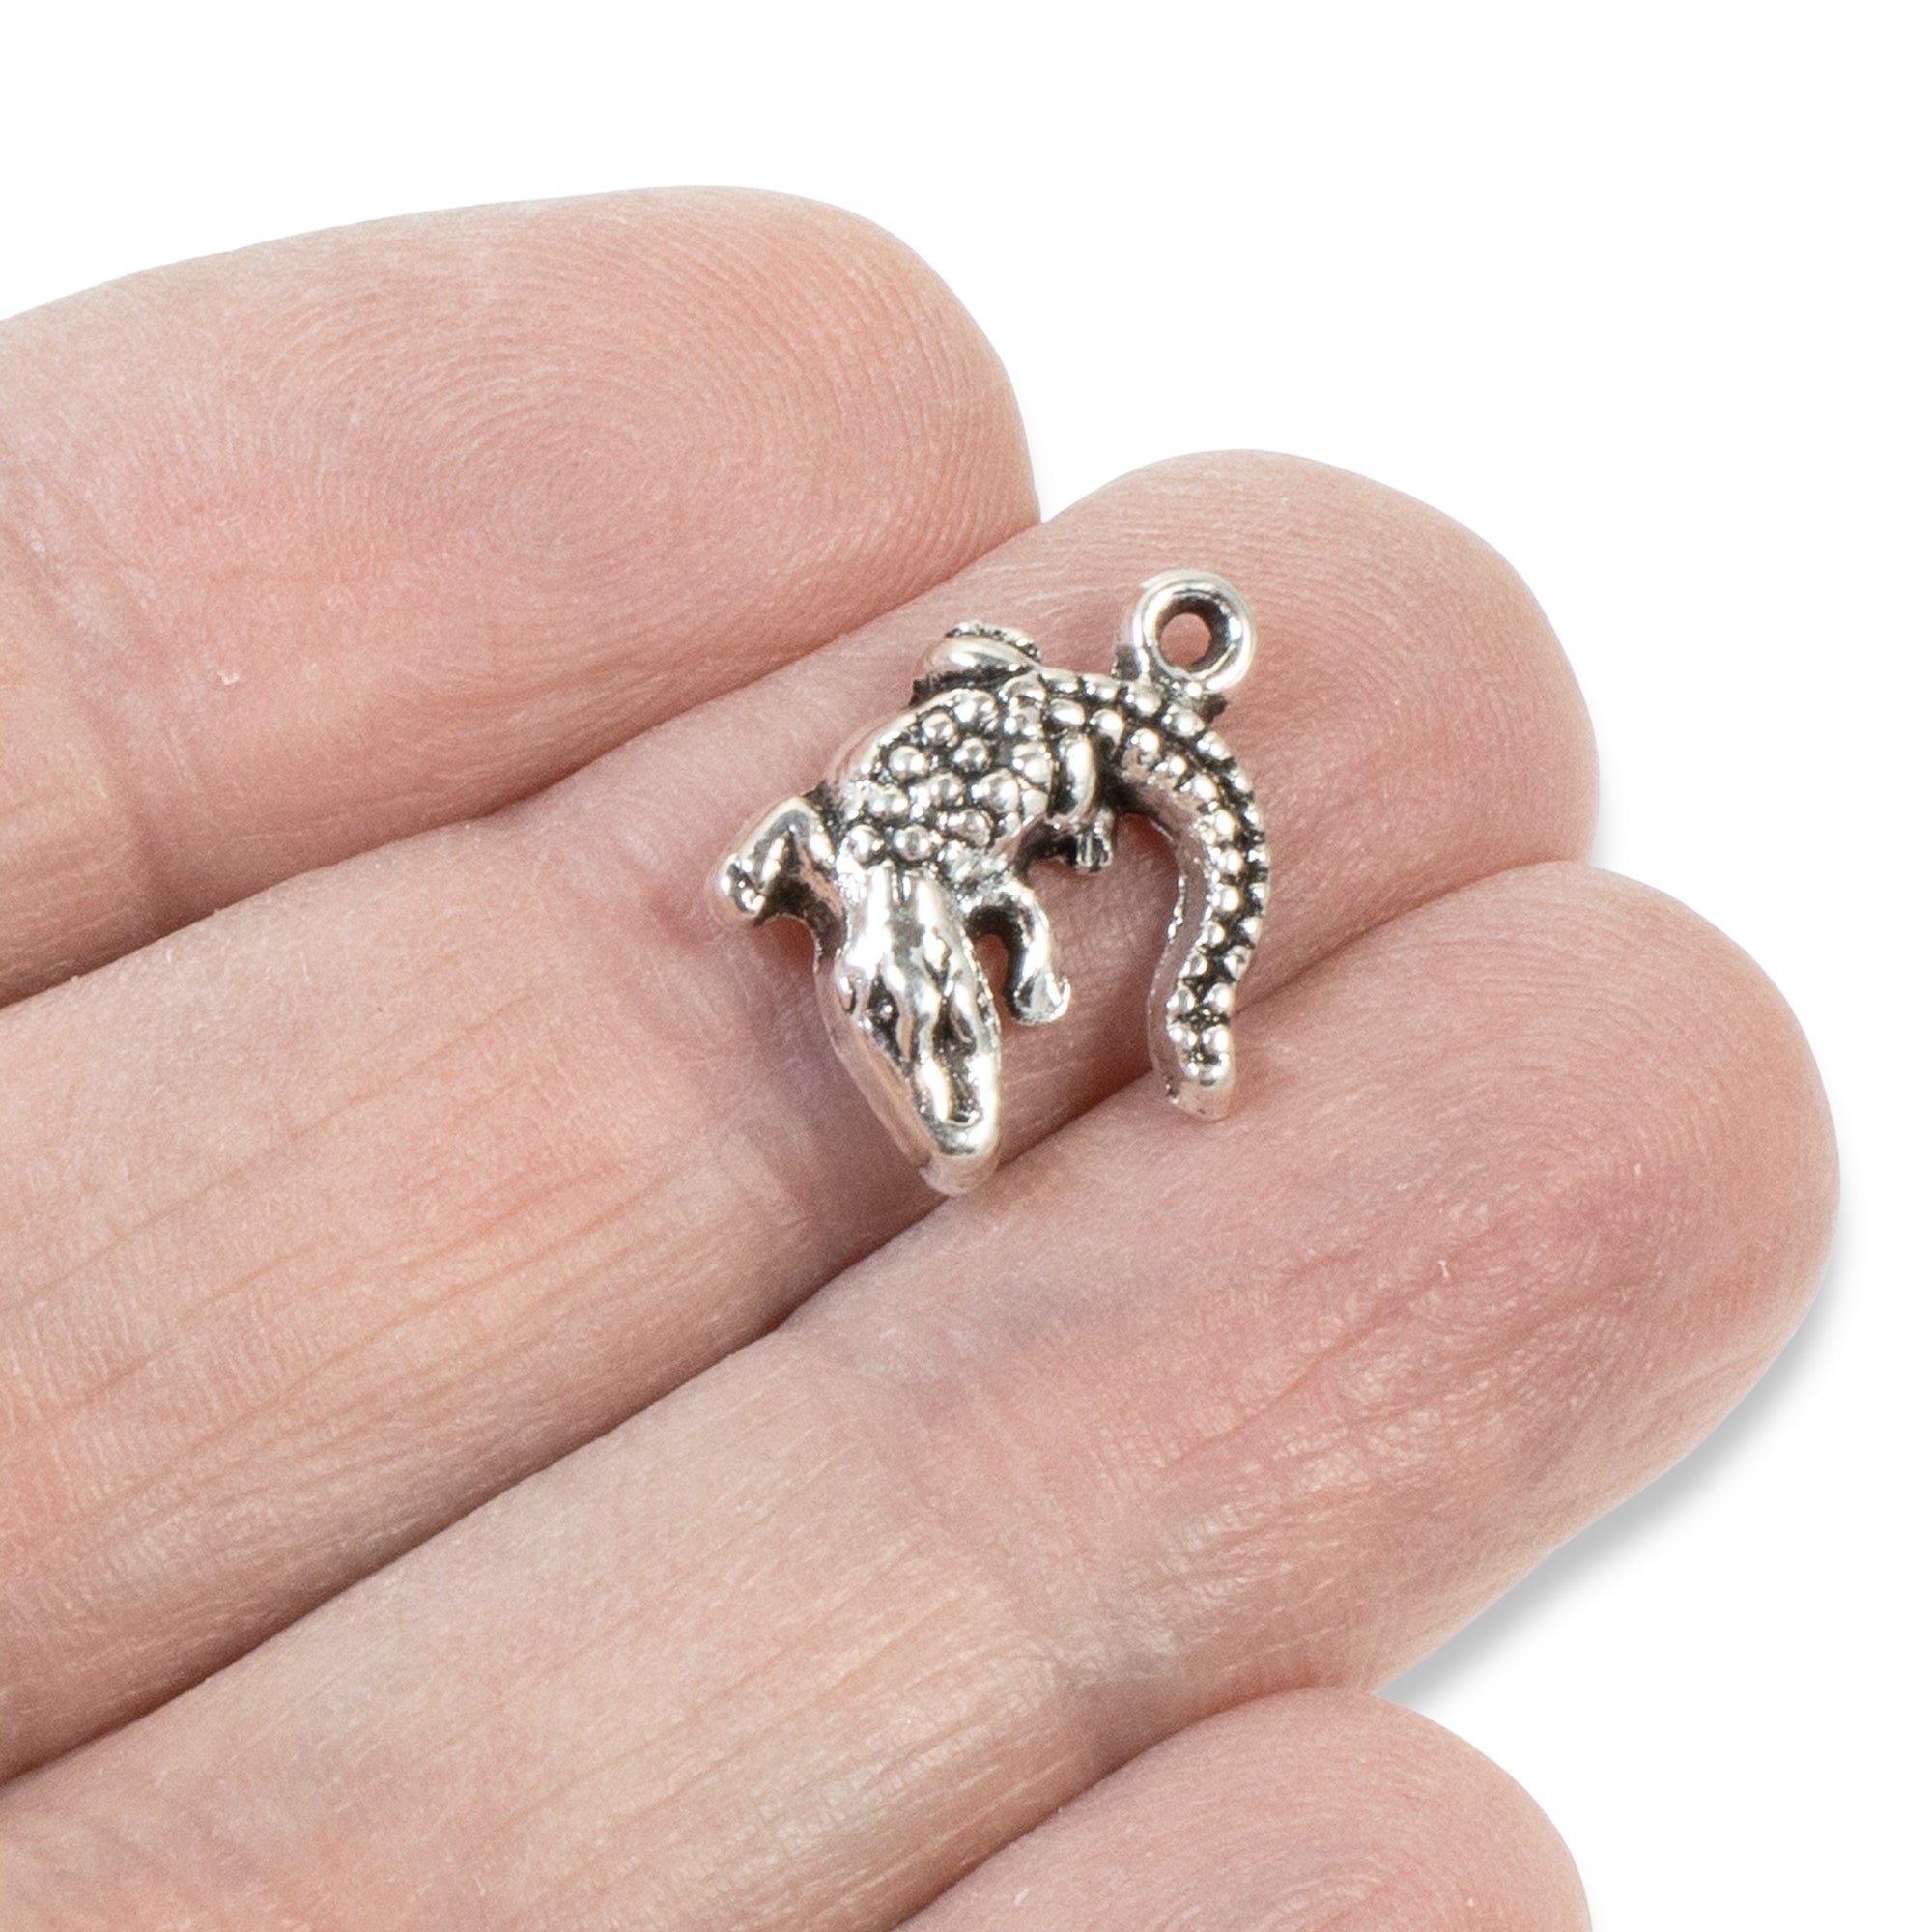 Wholesale Animal Charms for Jewelry Making - TierraCast